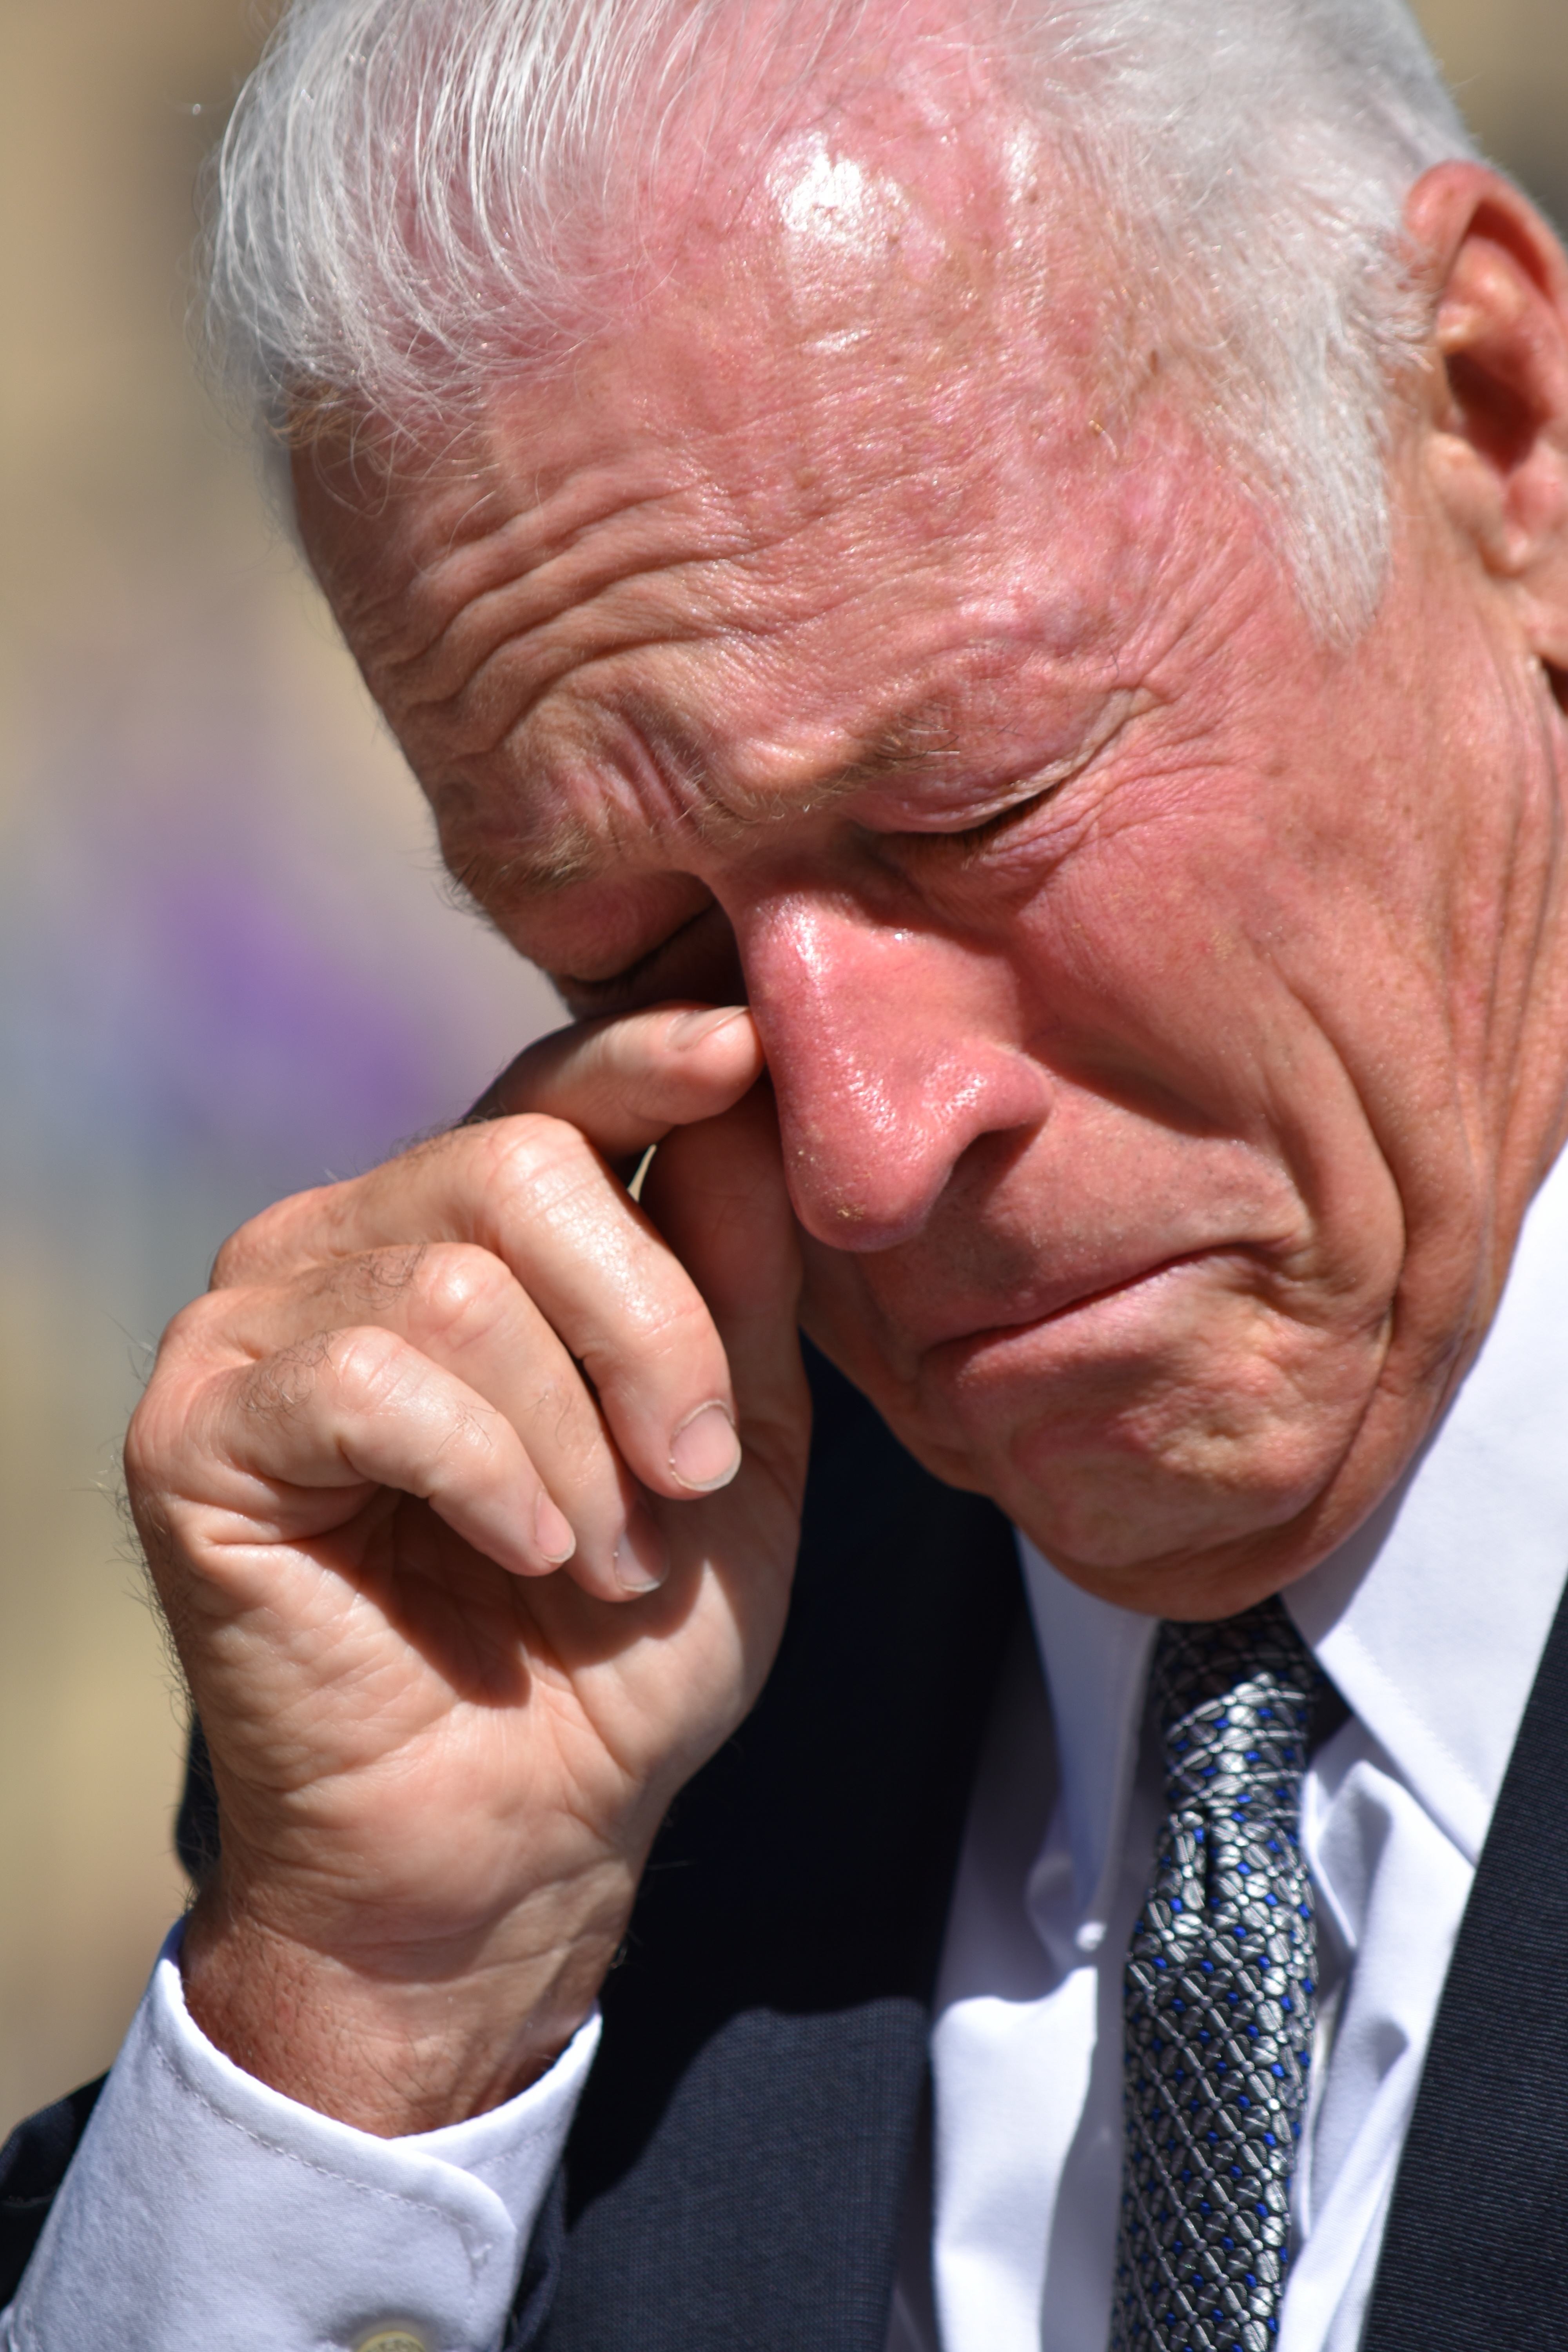 A senior man wiping his tears | Source: Shutterstock